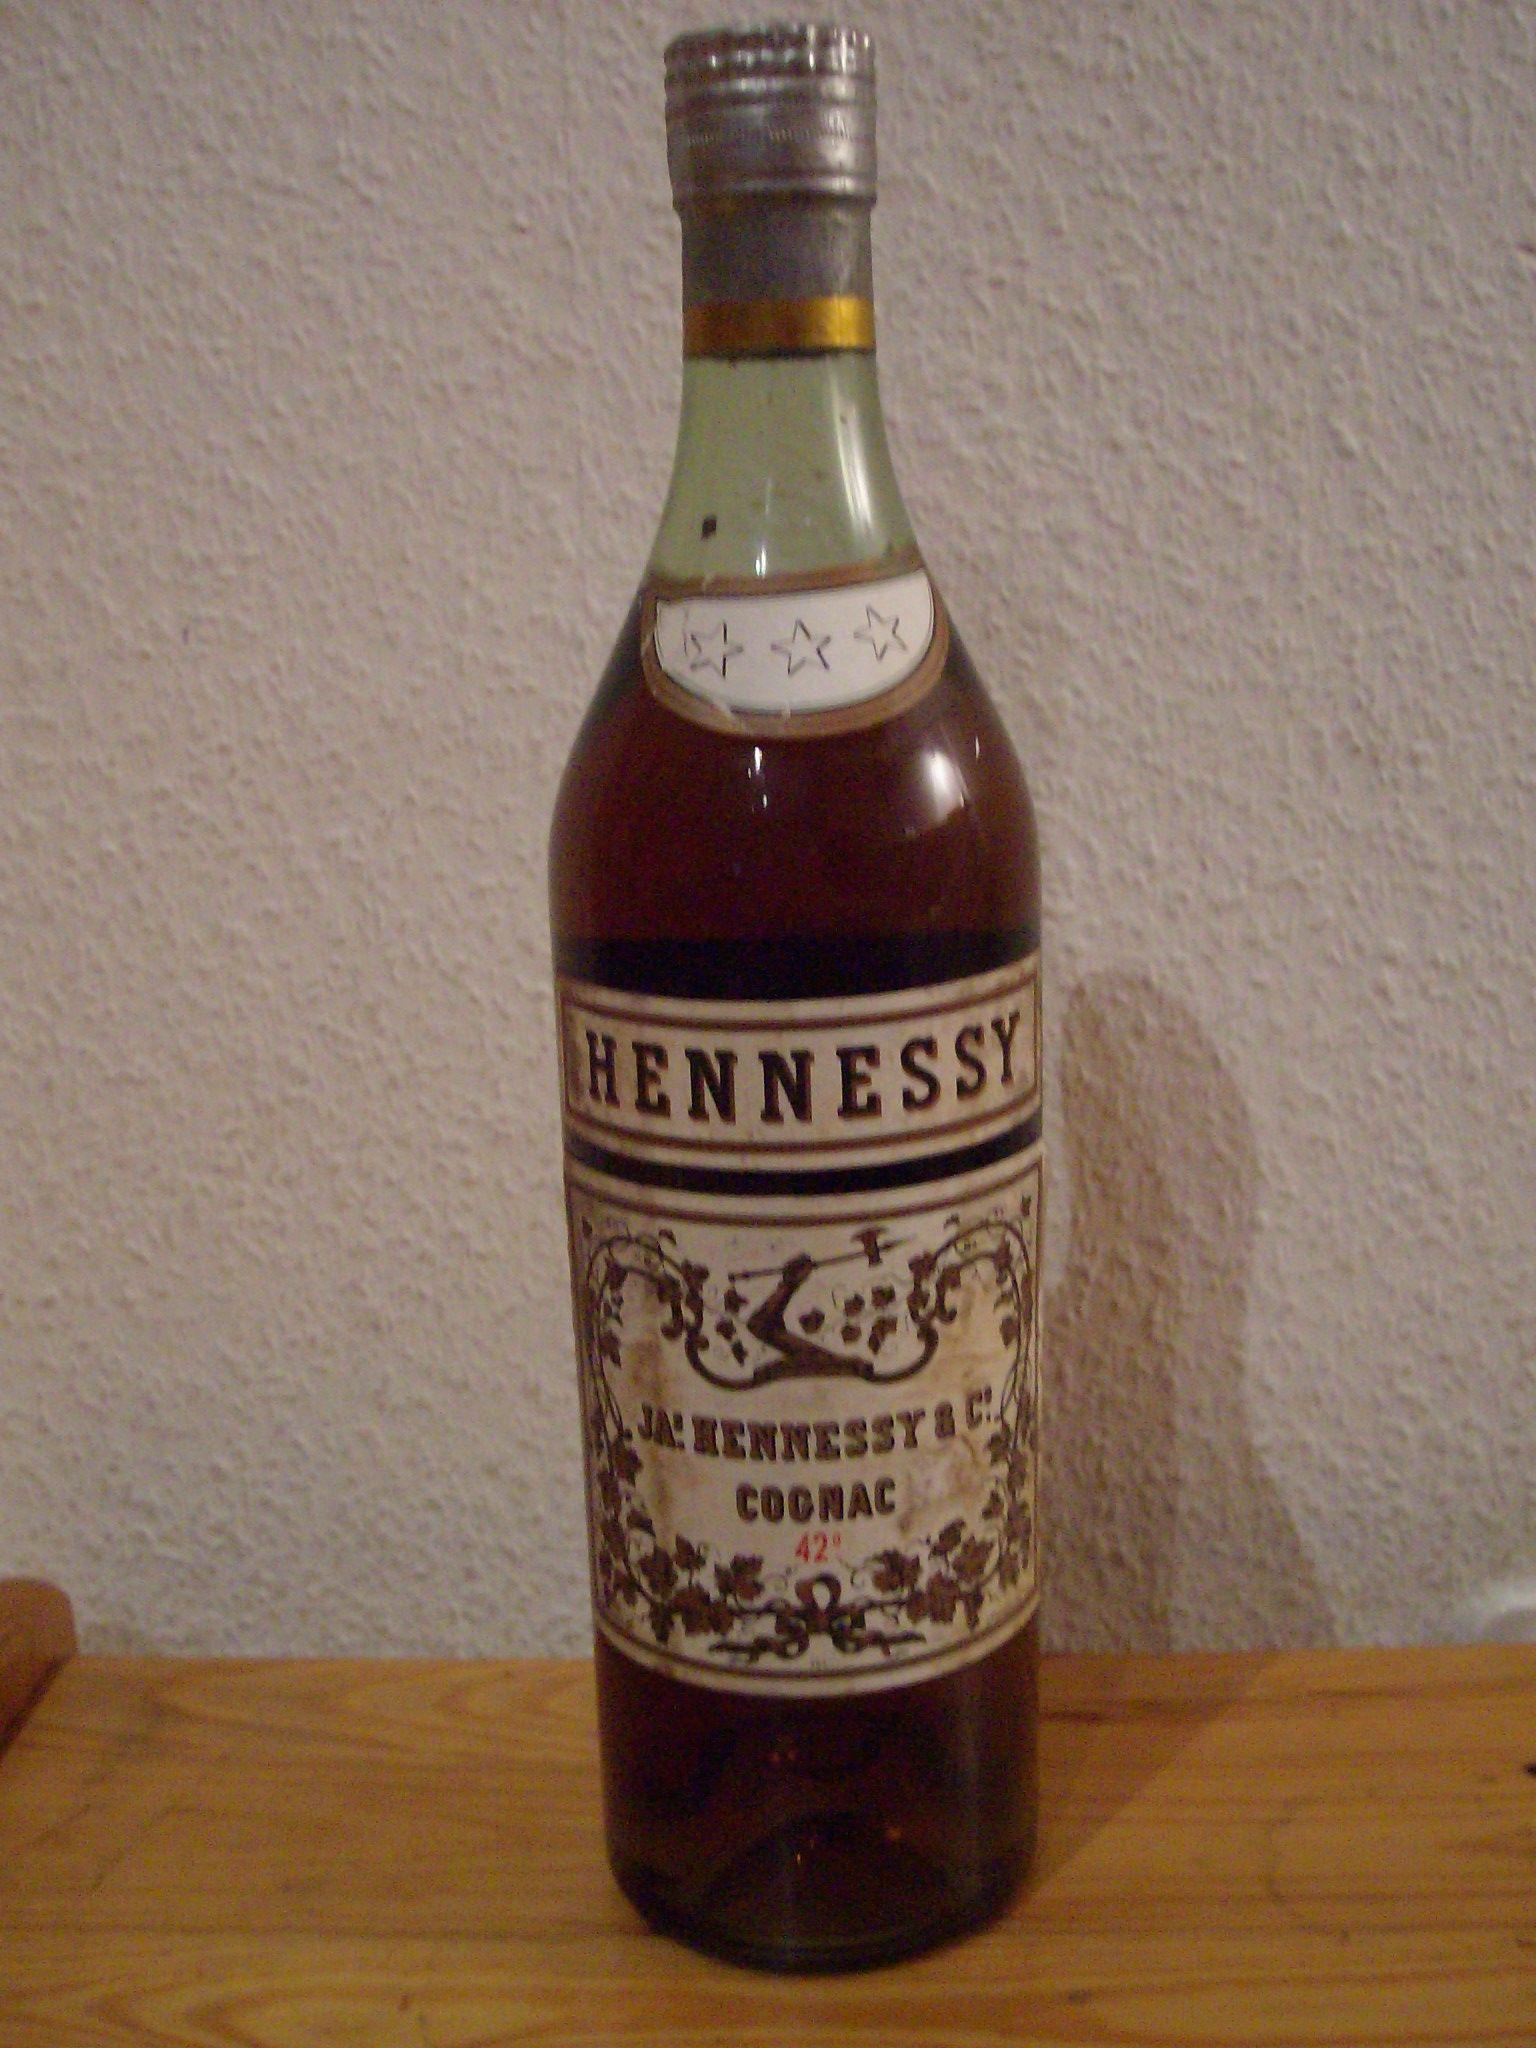 Hennessy Cognac Round Logo - Years Old Jas Hennessy & Co. Cognac 3 Stars Bottle. Cognac